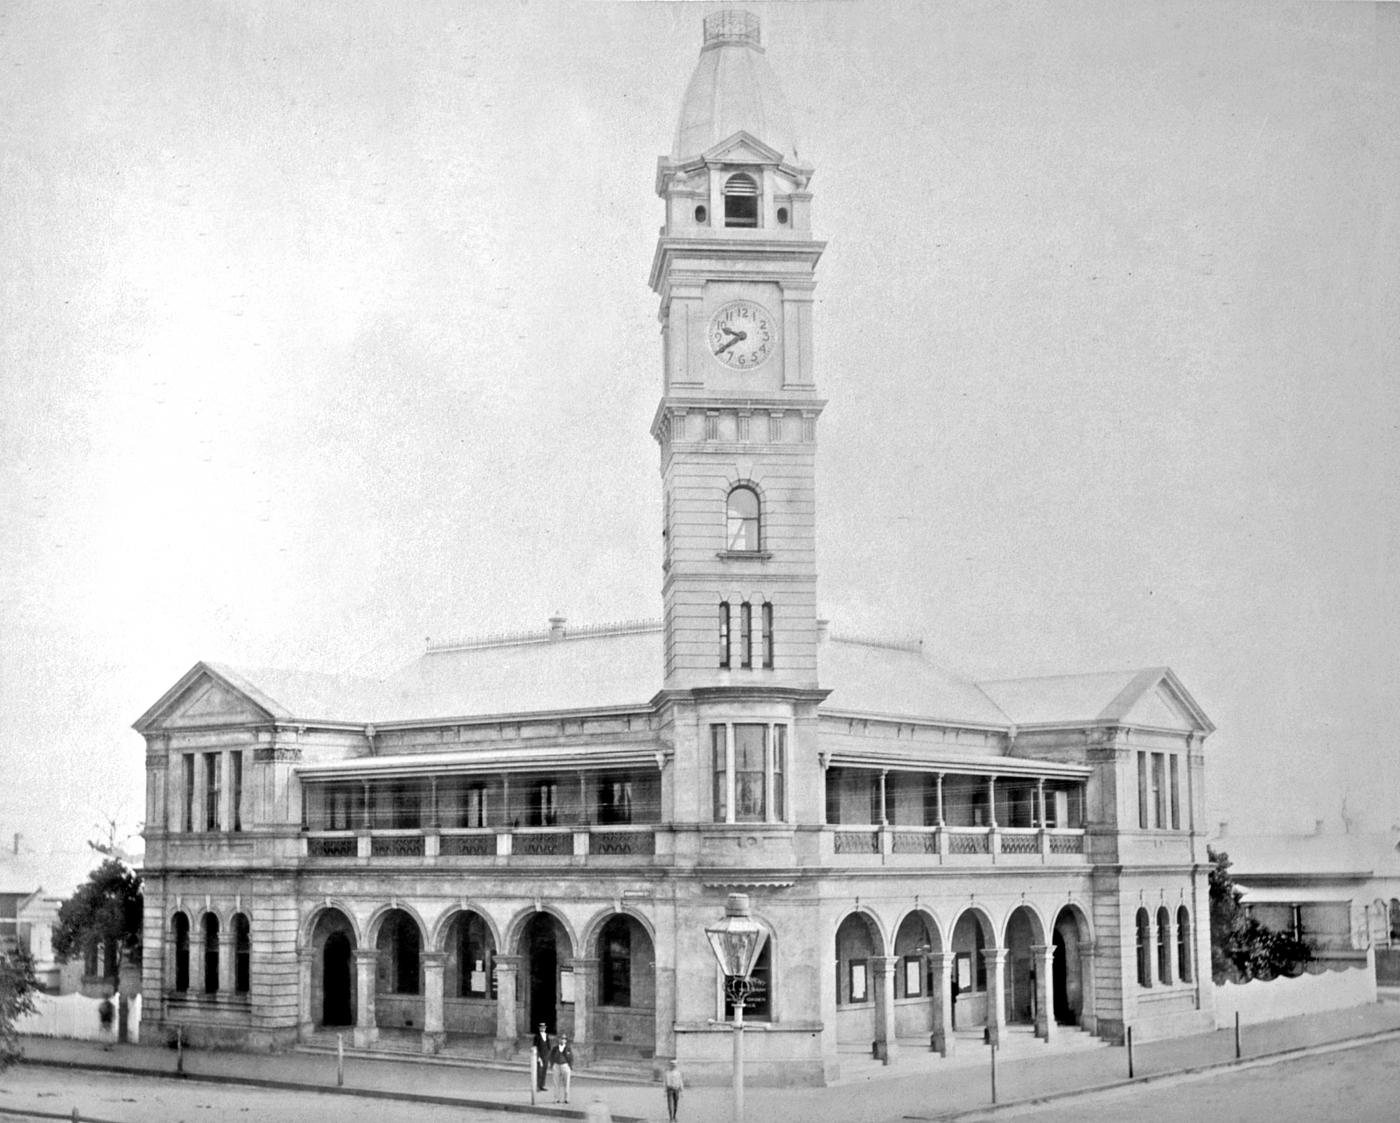 Post and Telegraph Offices, Bundaberg